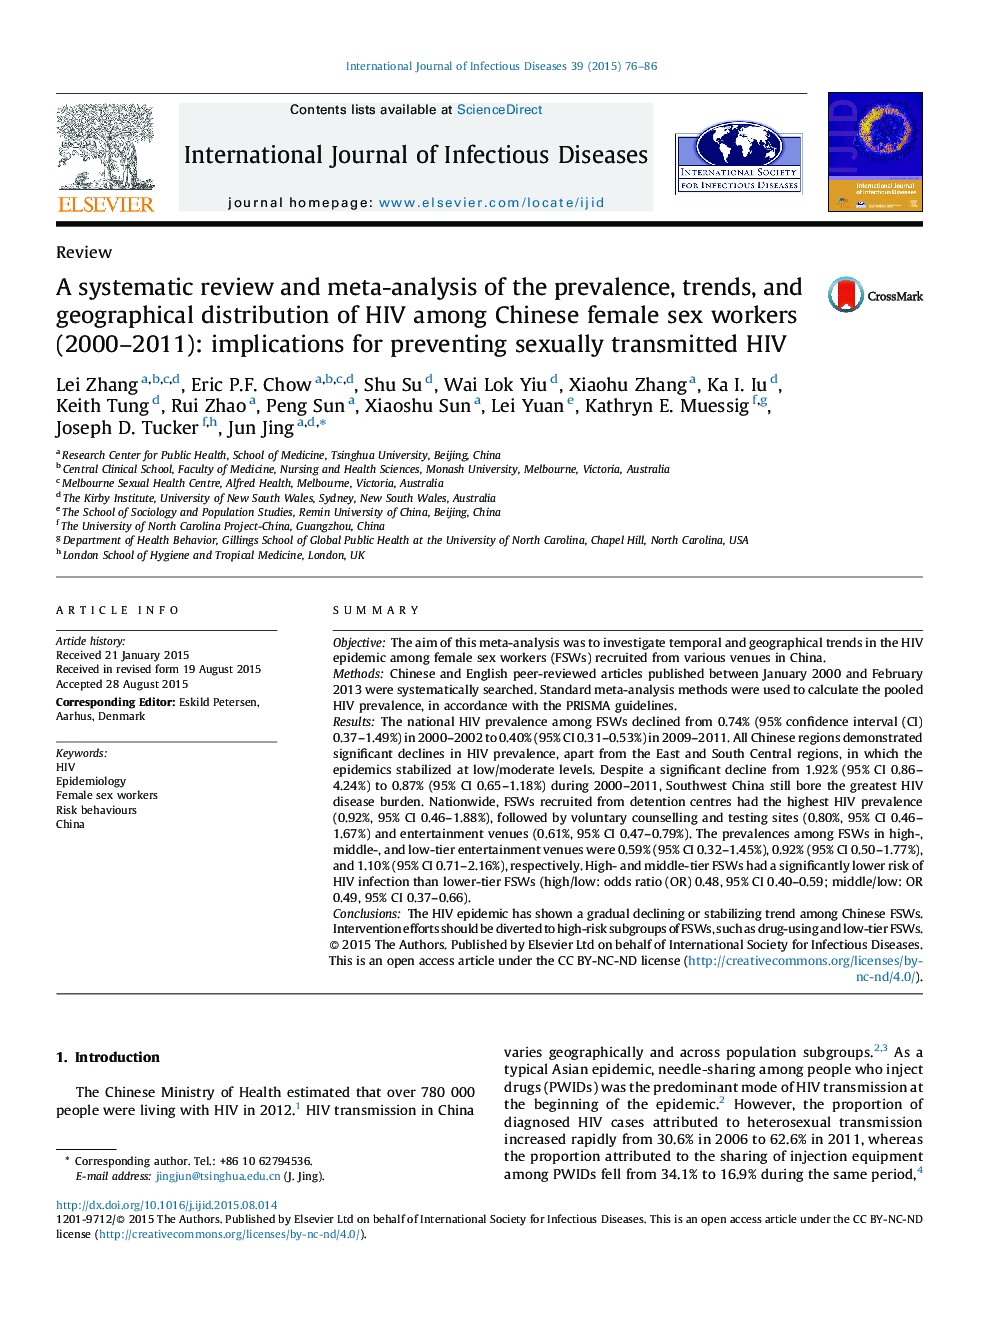 A systematic review and meta-analysis of the prevalence, trends, and geographical distribution of HIV among Chinese female sex workers (2000–2011): implications for preventing sexually transmitted HIV